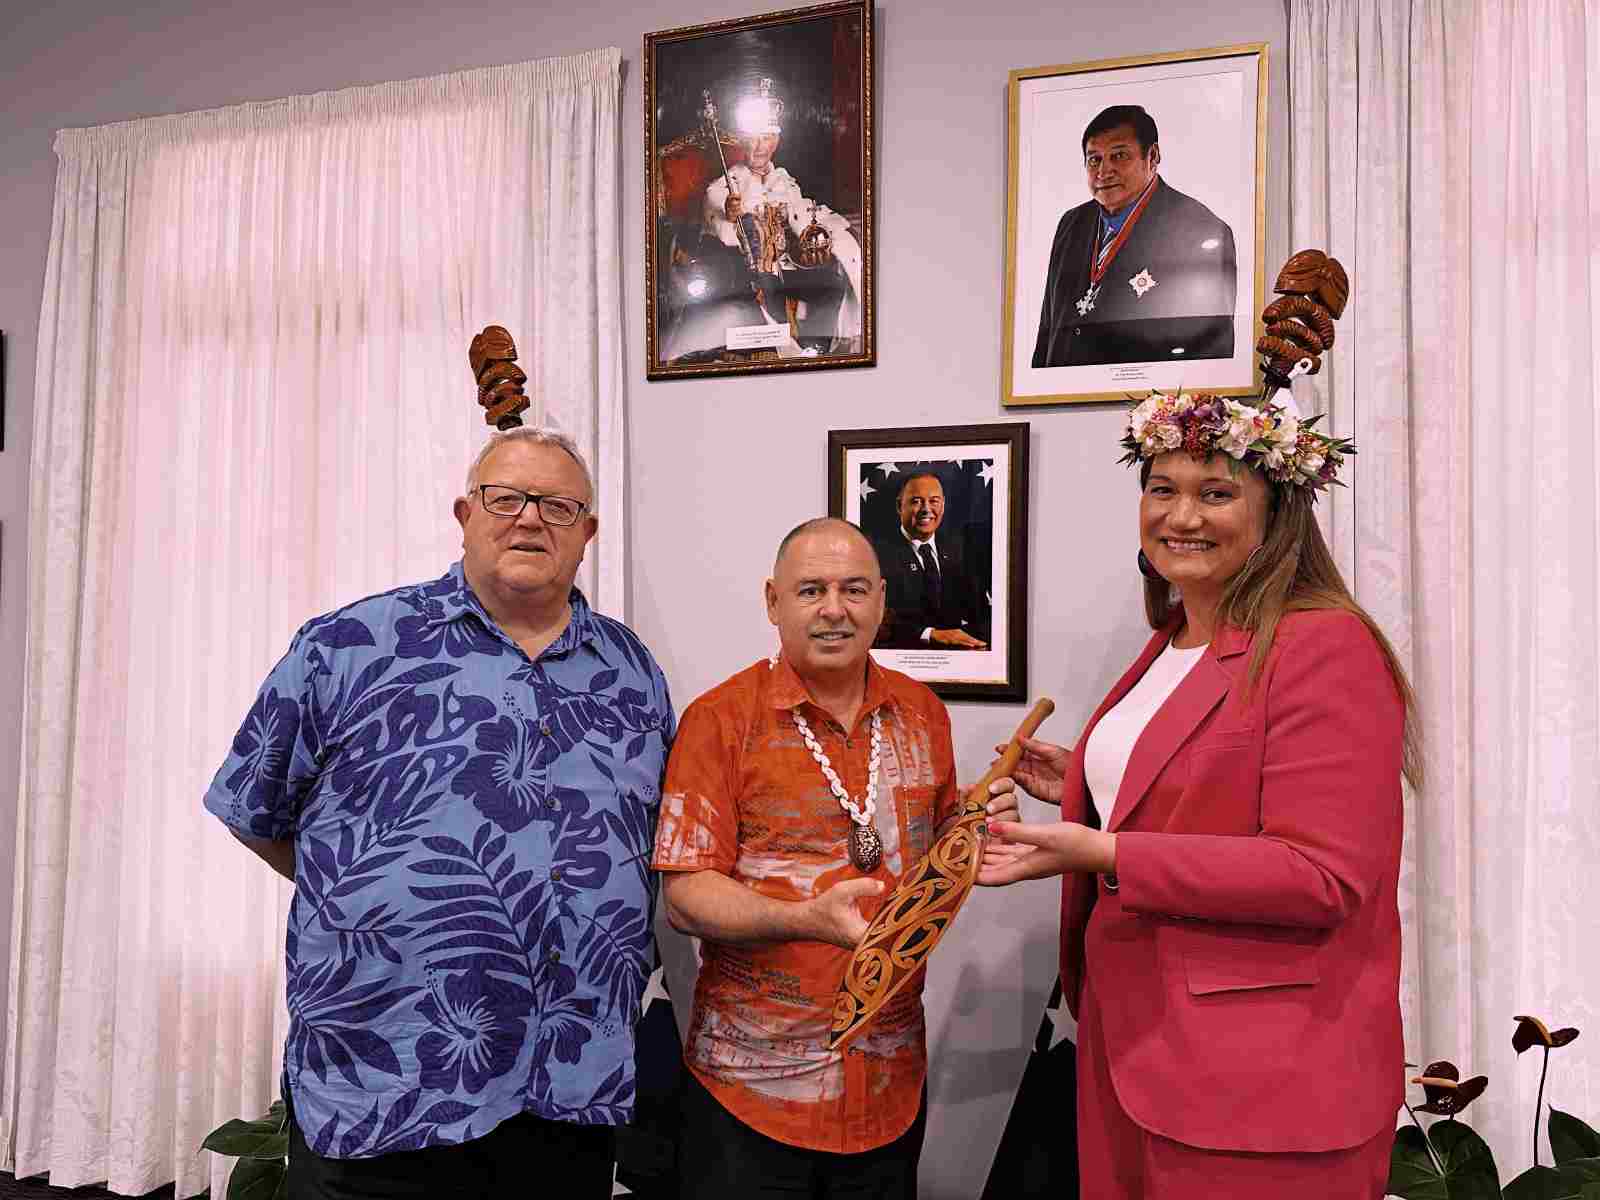 A hoe waka gifted to Cook Islands Prime Minister Mark Brown signifying unity between the nations. Photo/Supplied